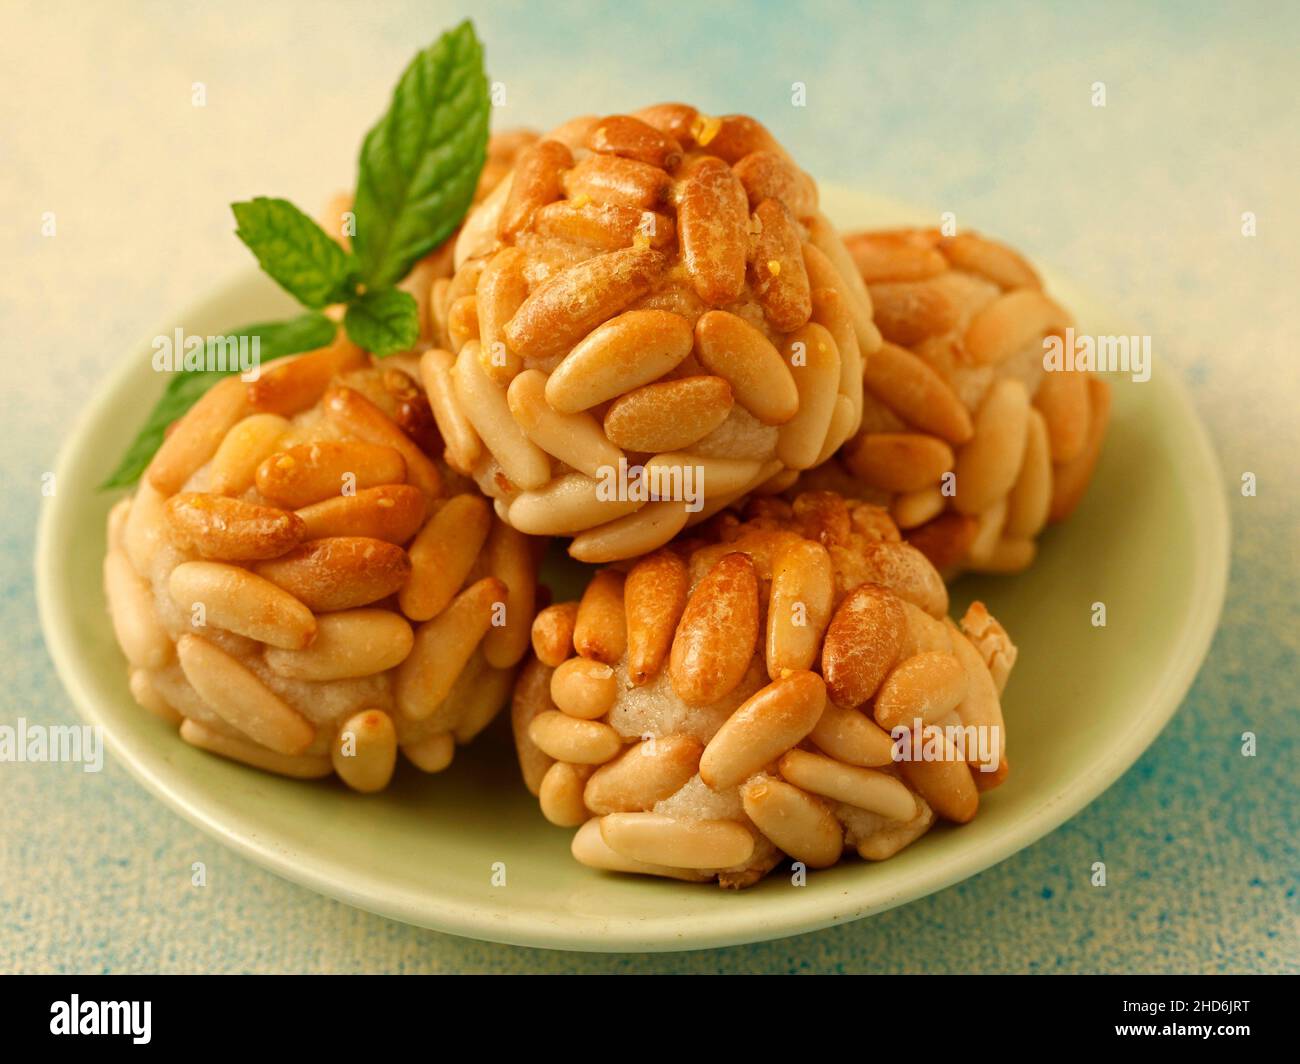 Panellets. Typical dessert with pine nuts from Catalonia, Spain. Stock Photo